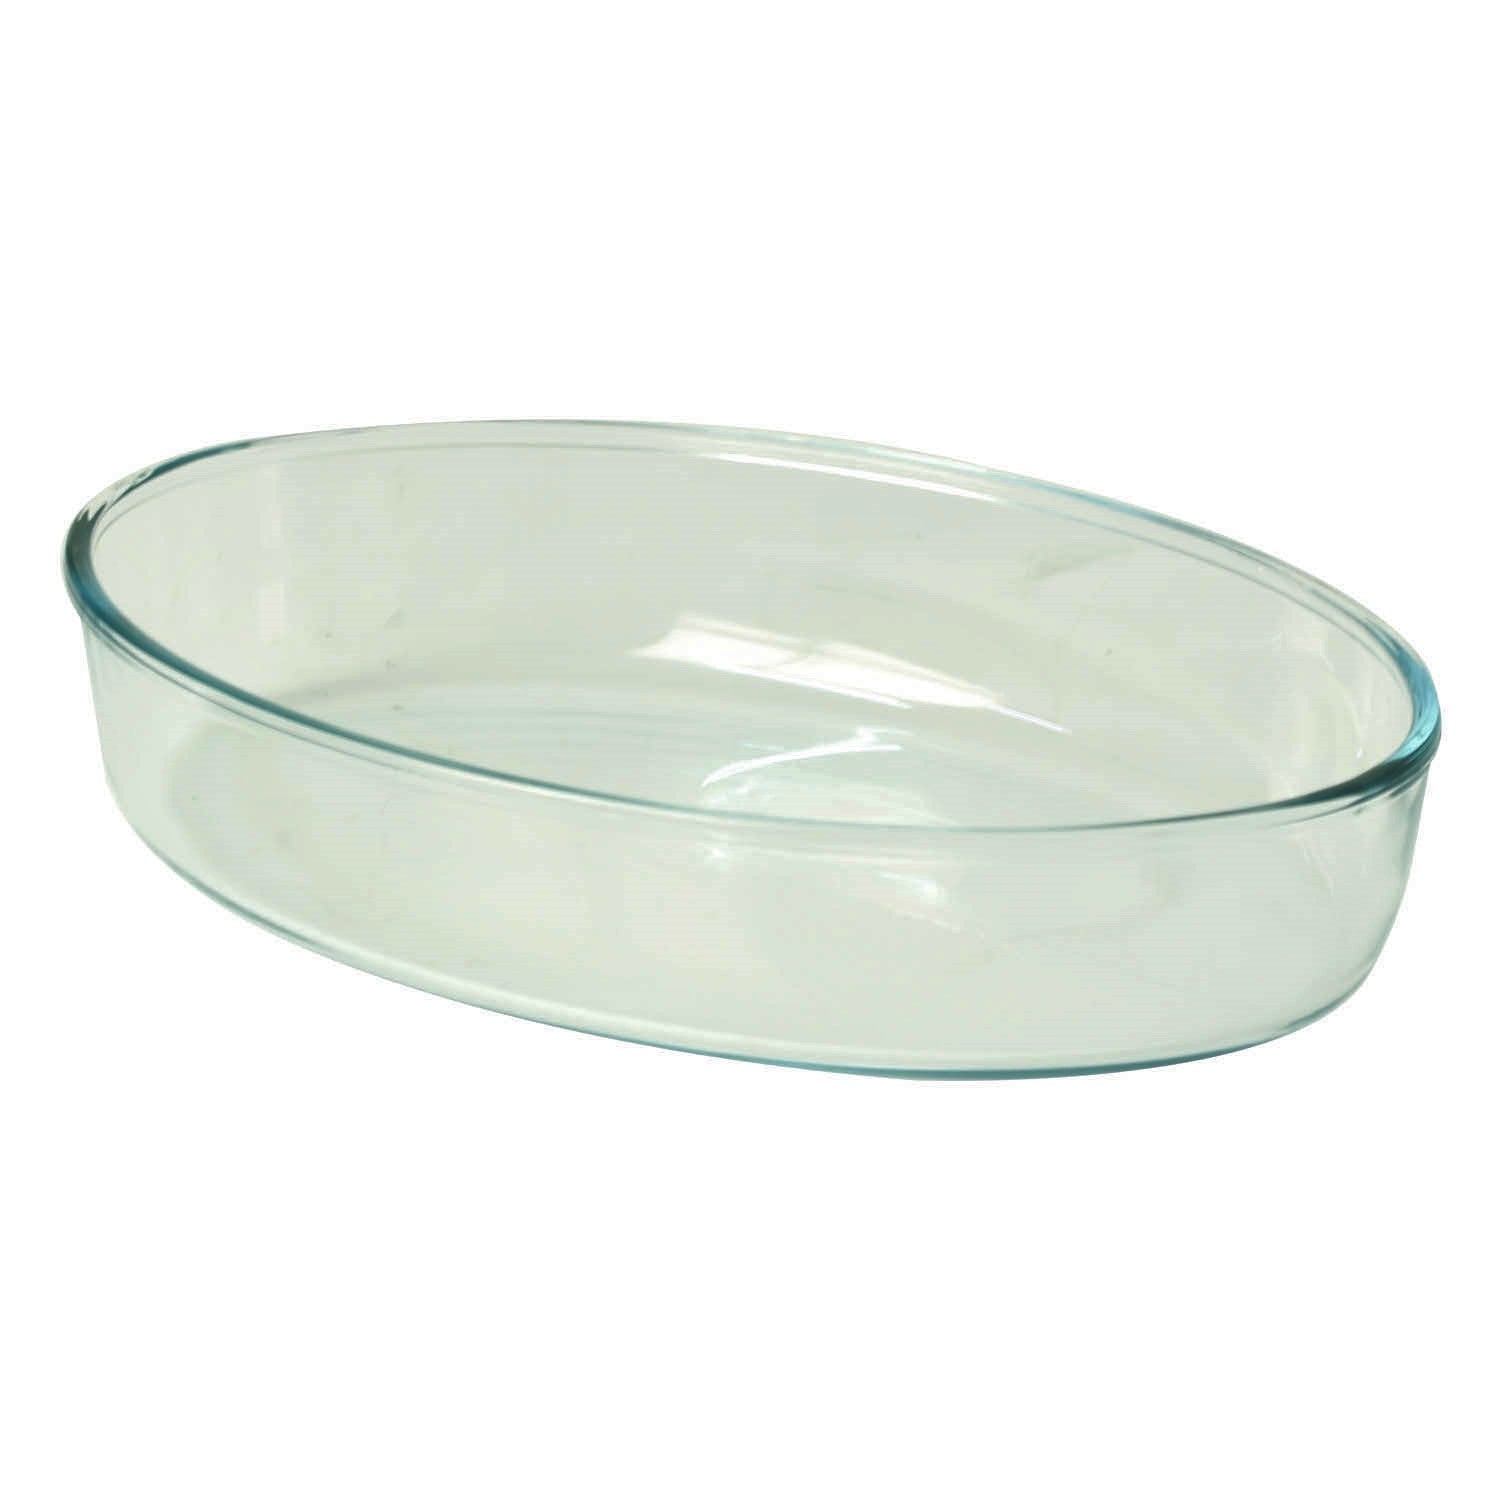 Borcam Clear Glass 26X18cm Food Pie Pasta Baking Oven Dish Tray